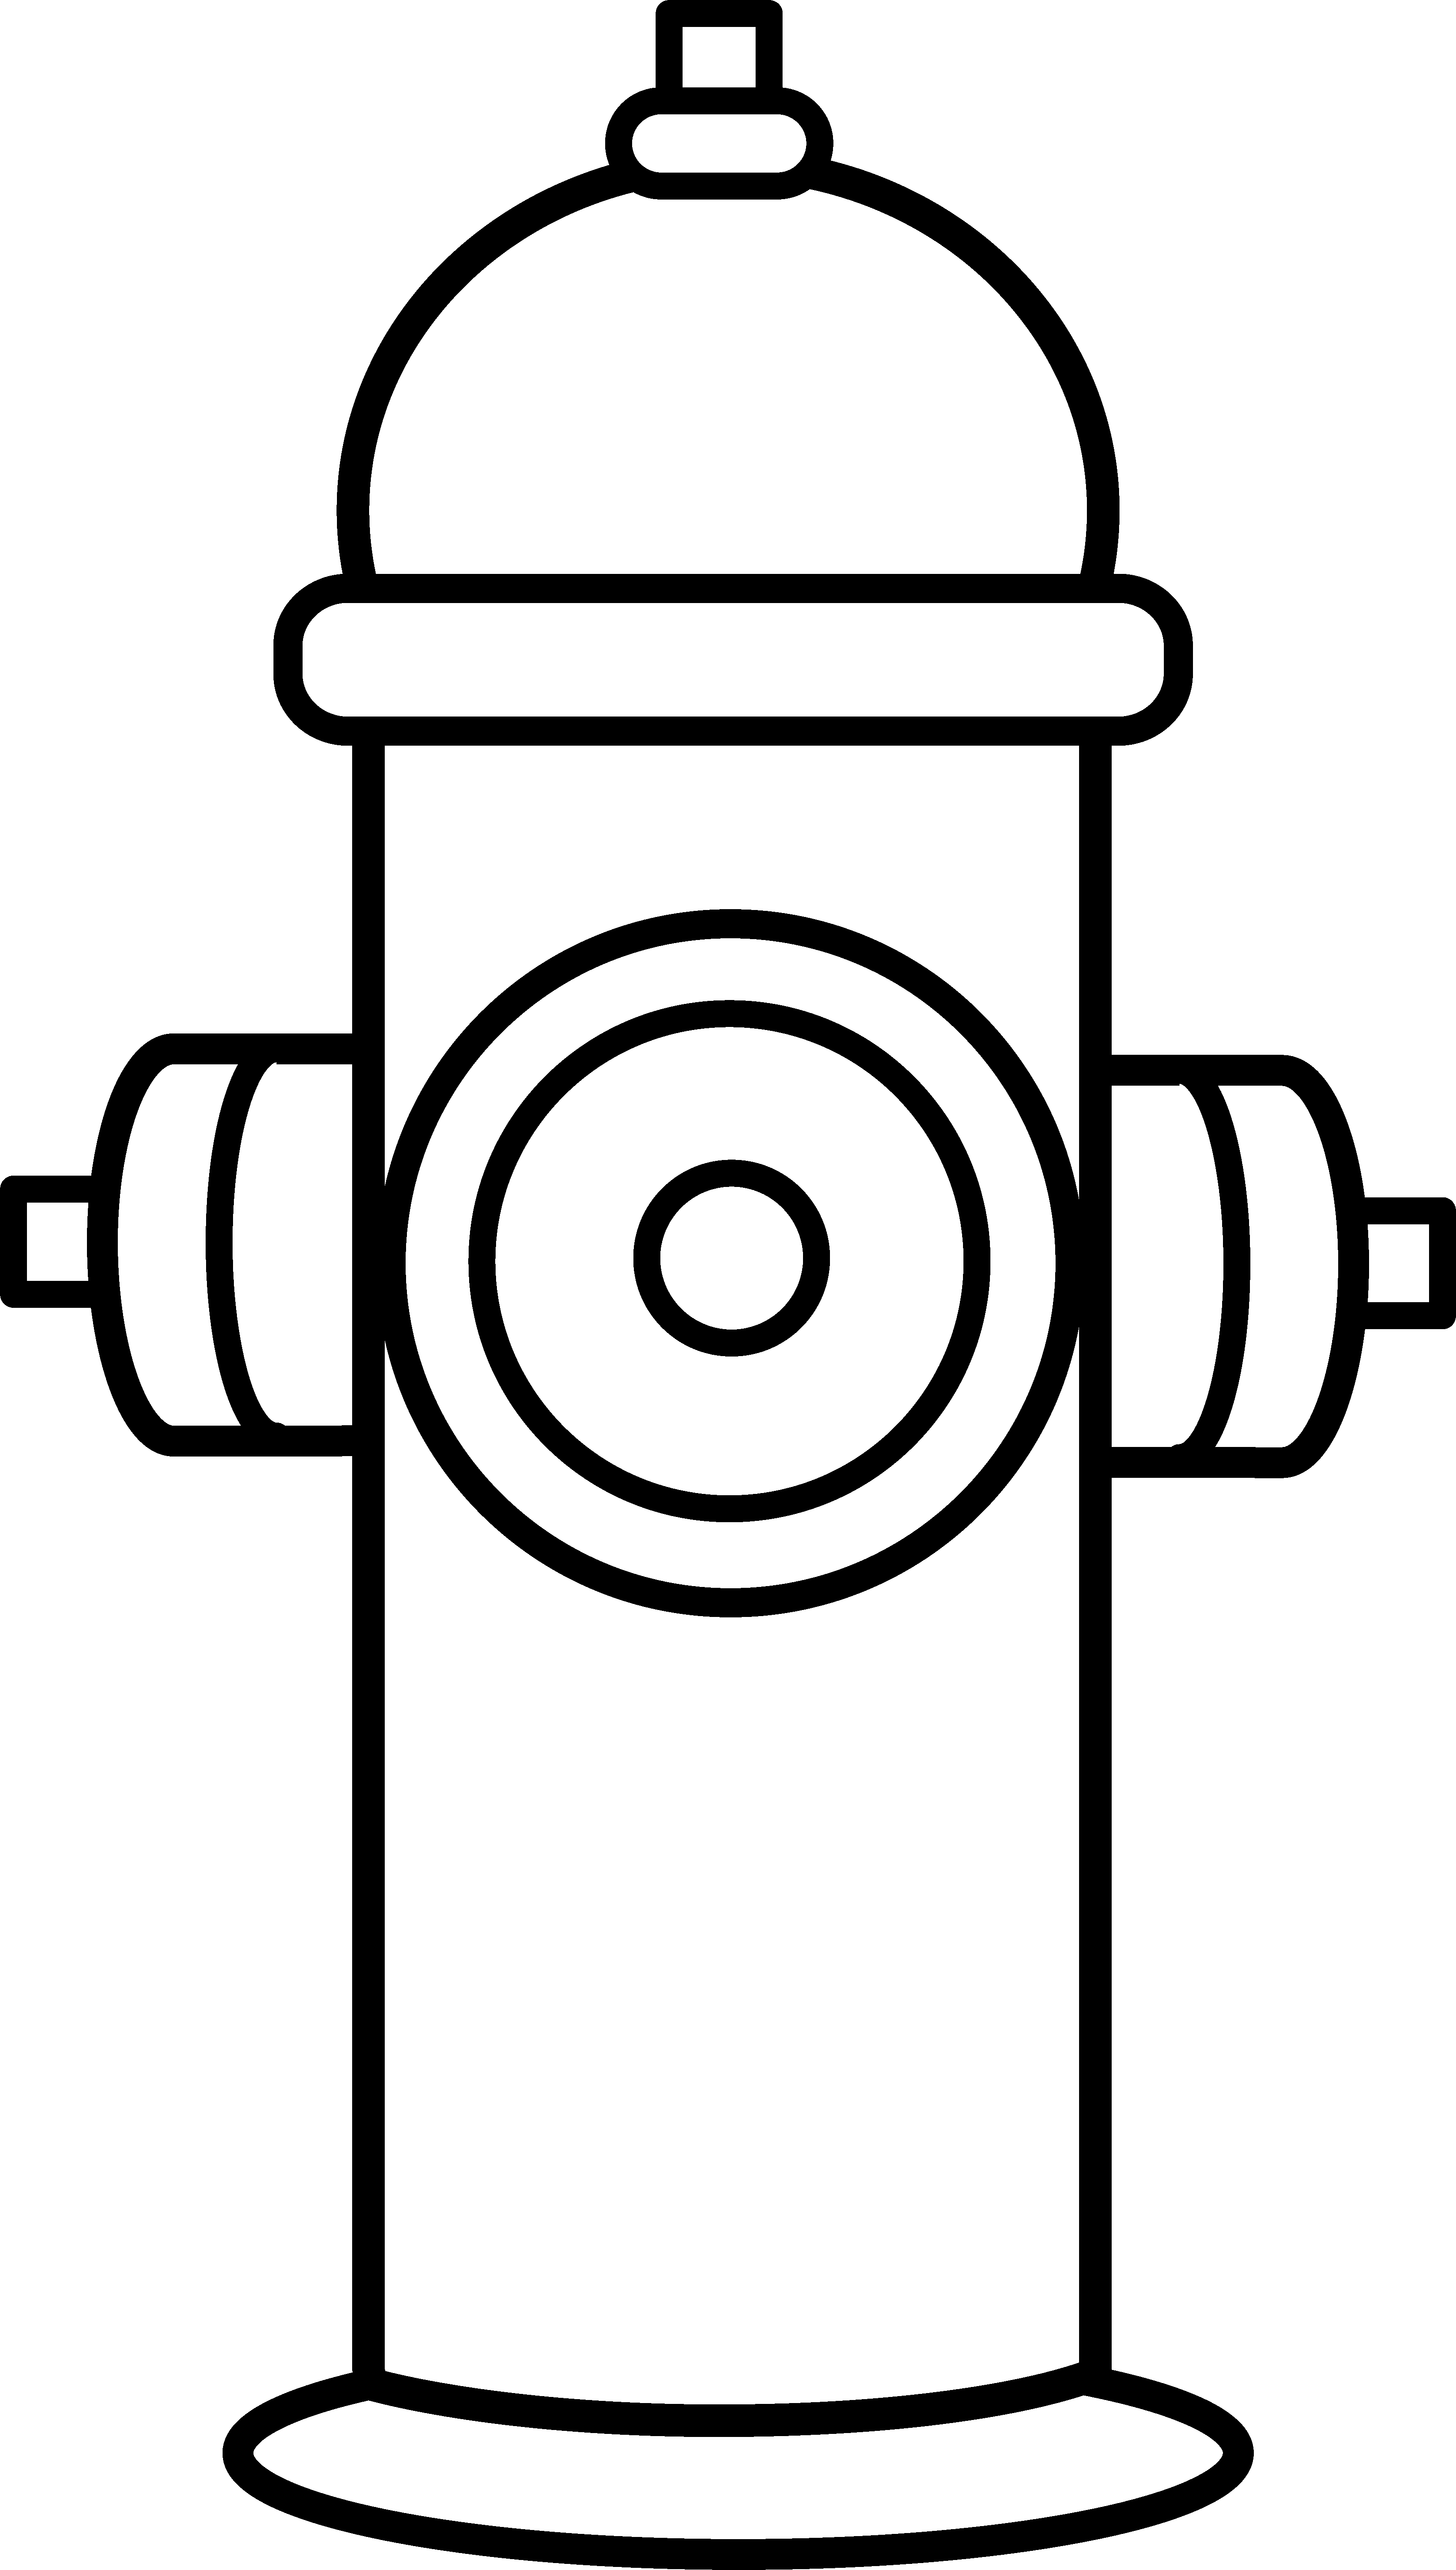 Fire Hydrant Black And White Clipart 